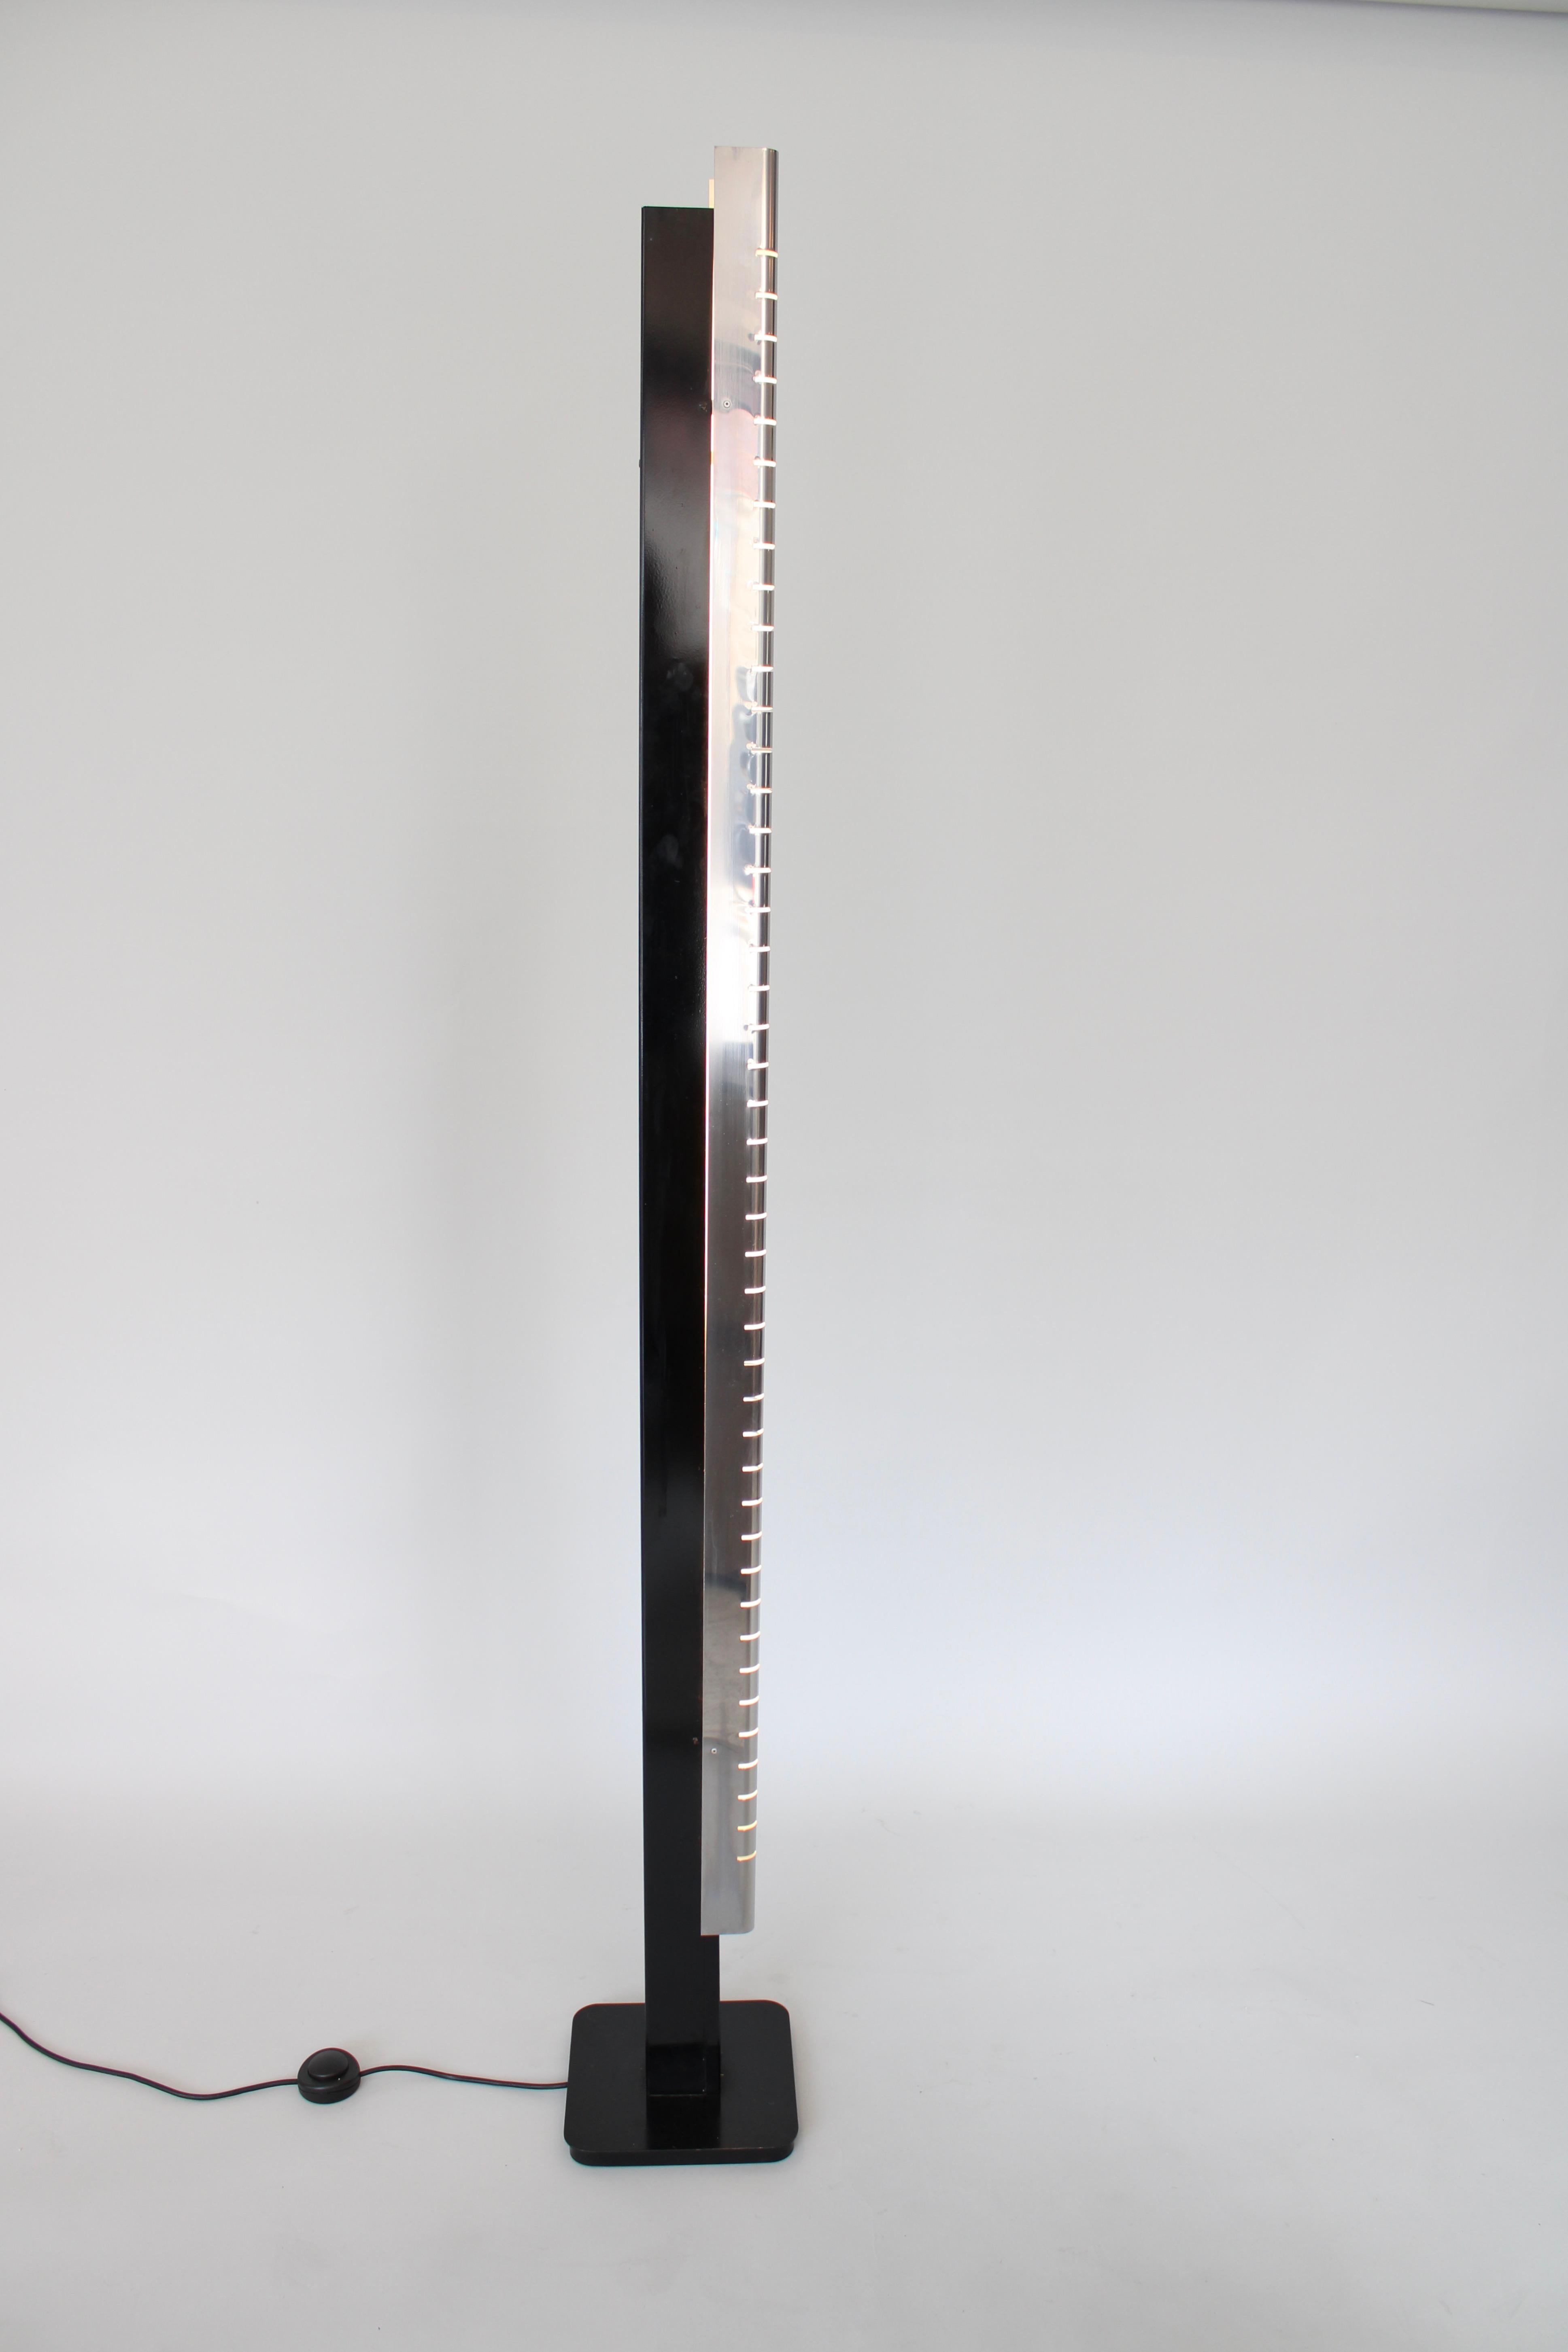 Late 20th Century Italian Column Floor Lamp by Lamperti Polished Nickel Chromed and Enameled Steel For Sale